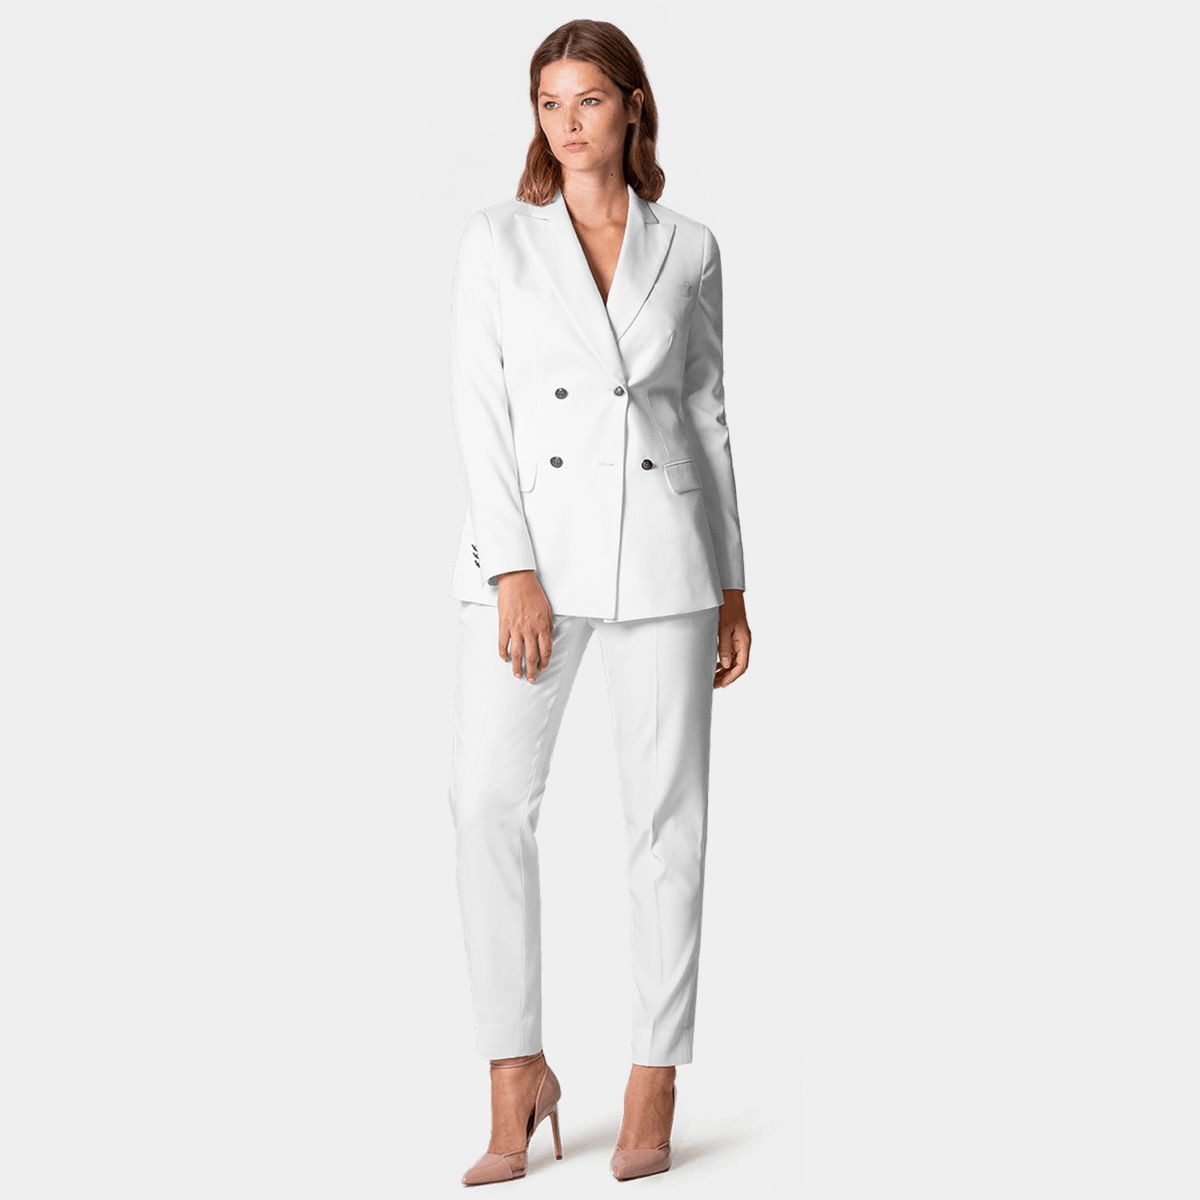 Women's White Suits  All White Suits for Women - Sumissura